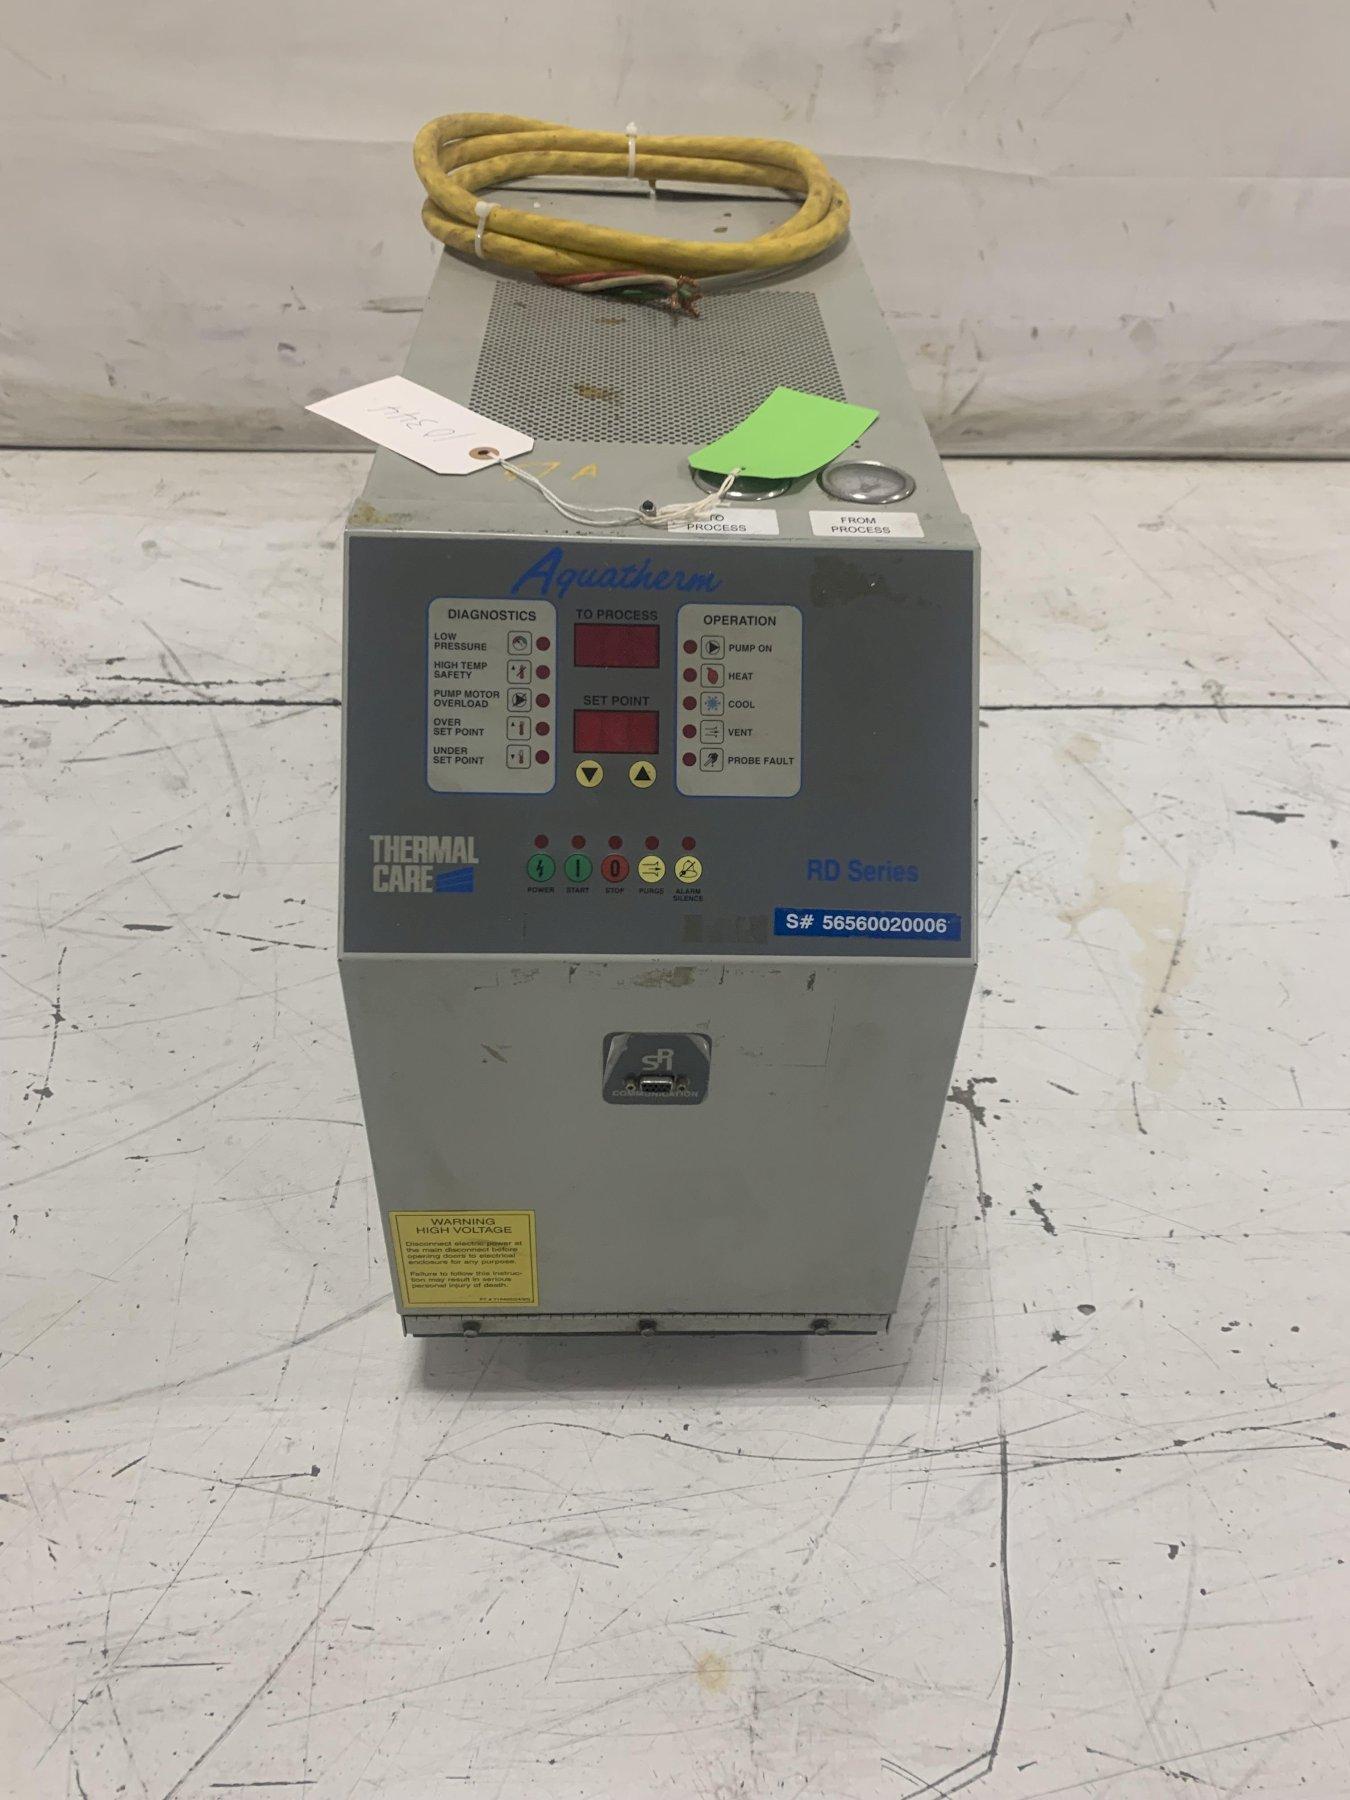 Aquatherm RD Series Thermal Care Mold Temperature Controller. 9kw, 1hp 460V